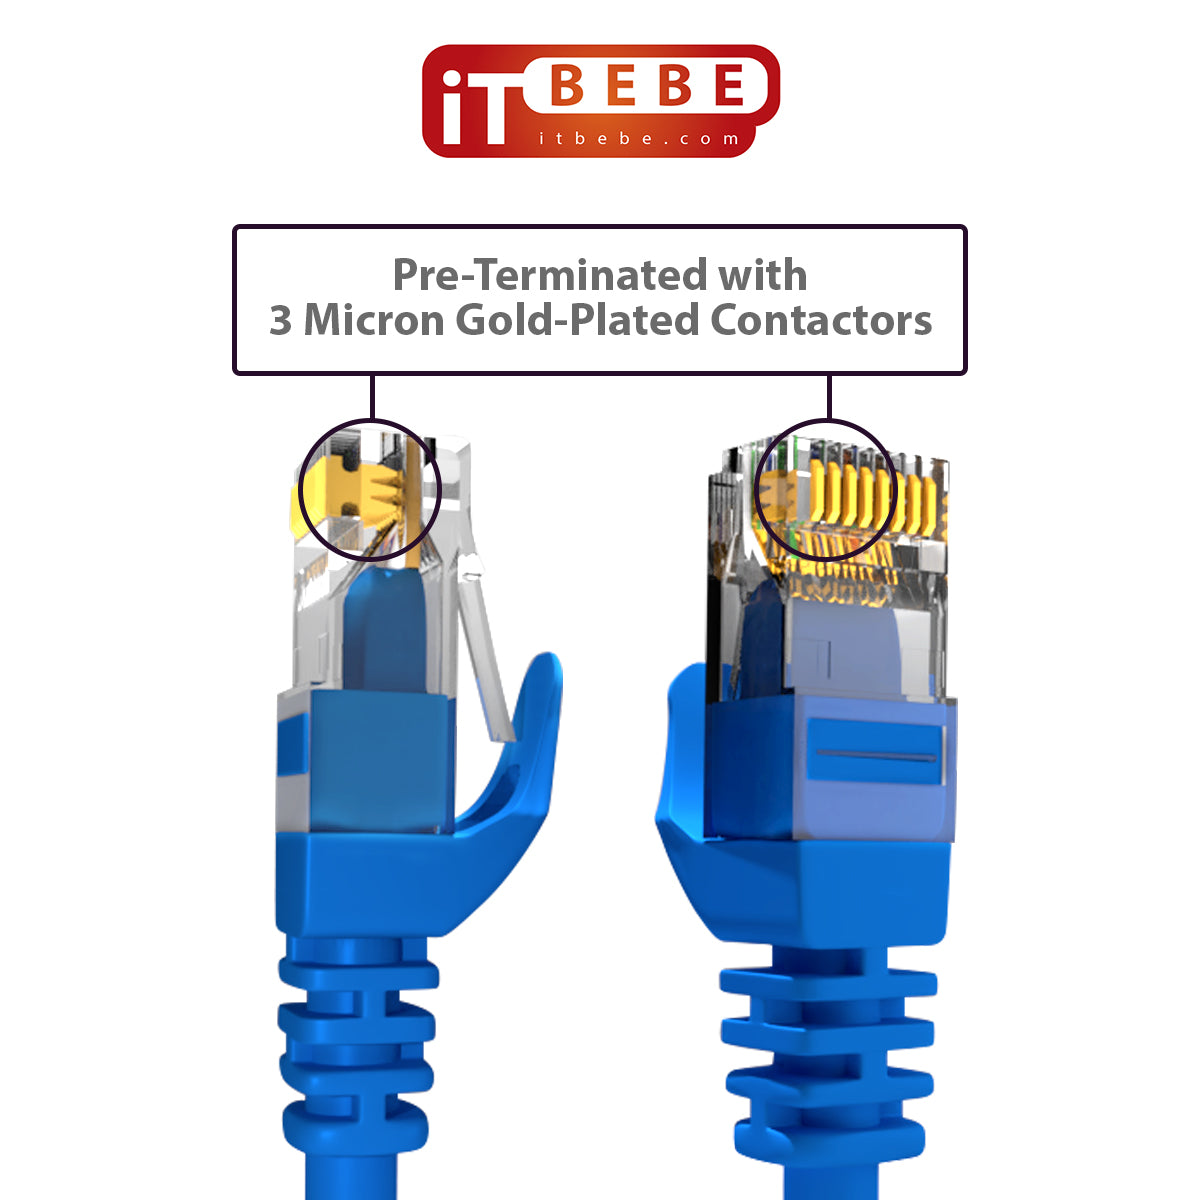 ITBEBE Cat6 Ethernet Cable Snagless RJ45 Network Patch Cables Pre-Term -  itbebe